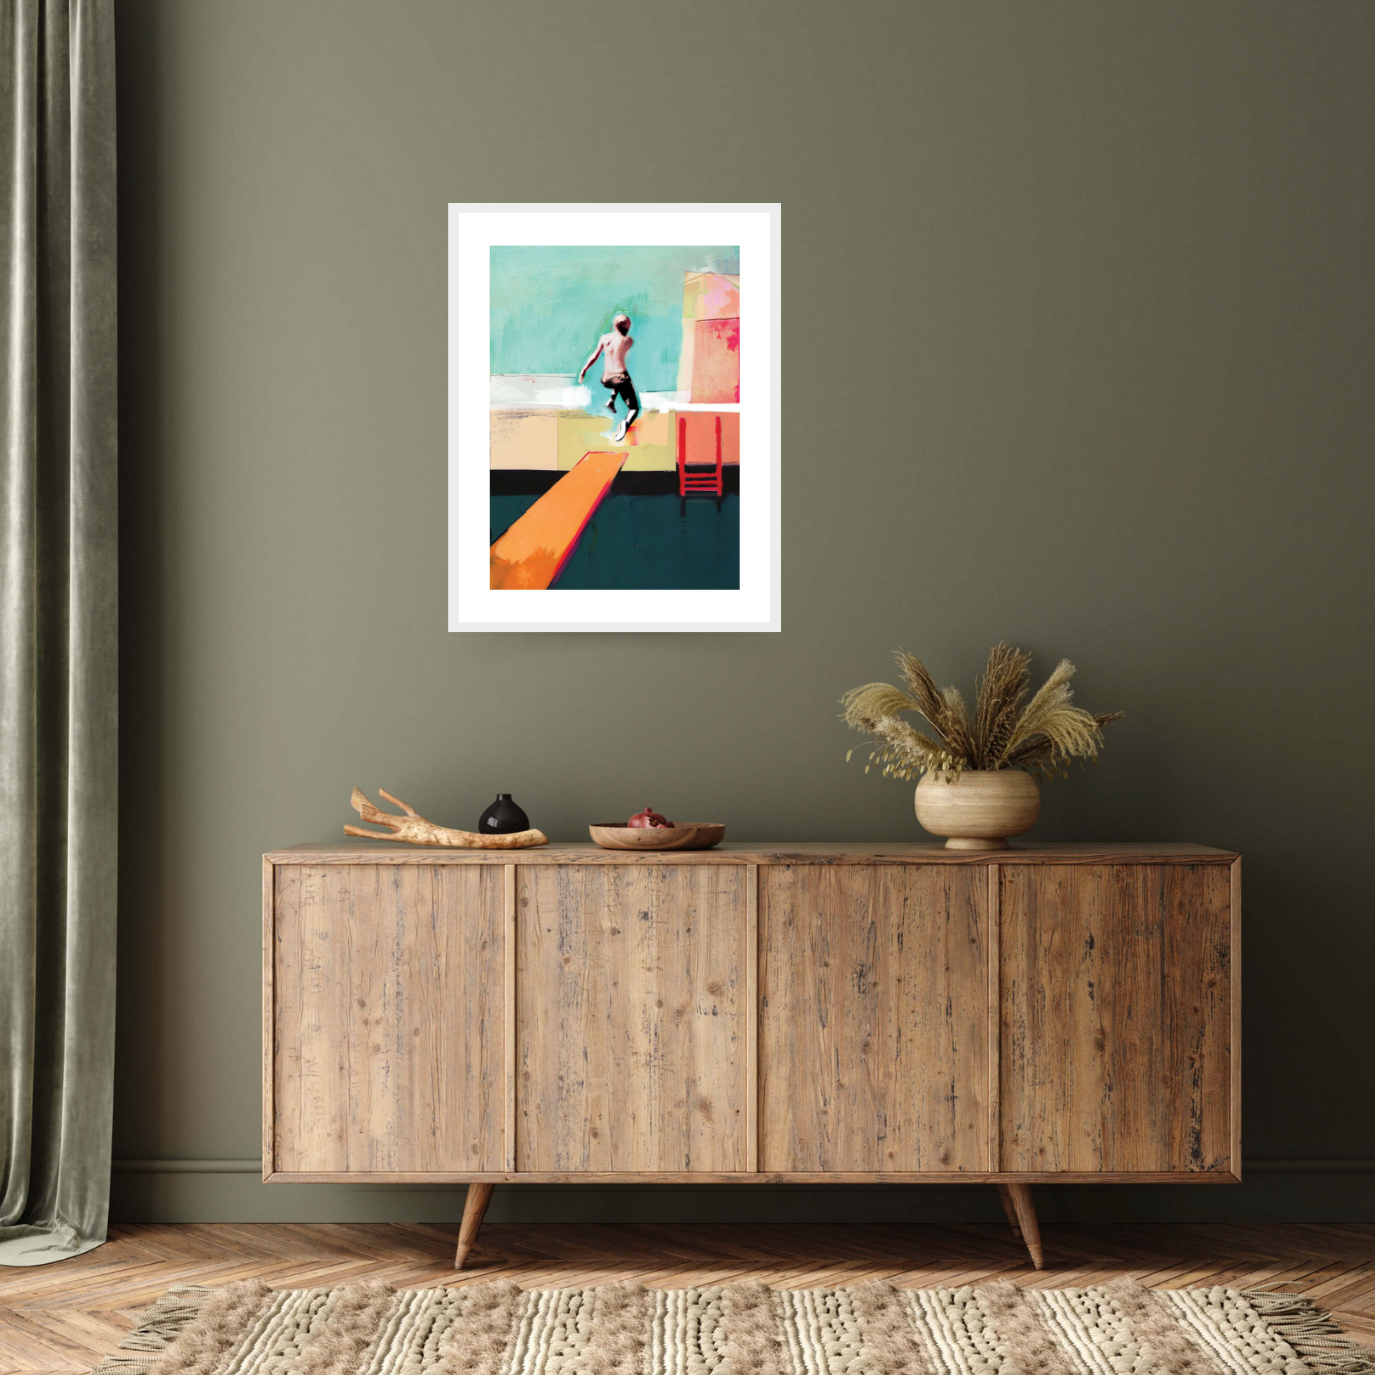 Dive into the vibrant world of 'Pool Day' by David McConochie: a captivating white framed print featuring a young boy leaping into a pool from an orange diving board against a stunning cyan sky. Experience the joy of summer with this colourful fine art print